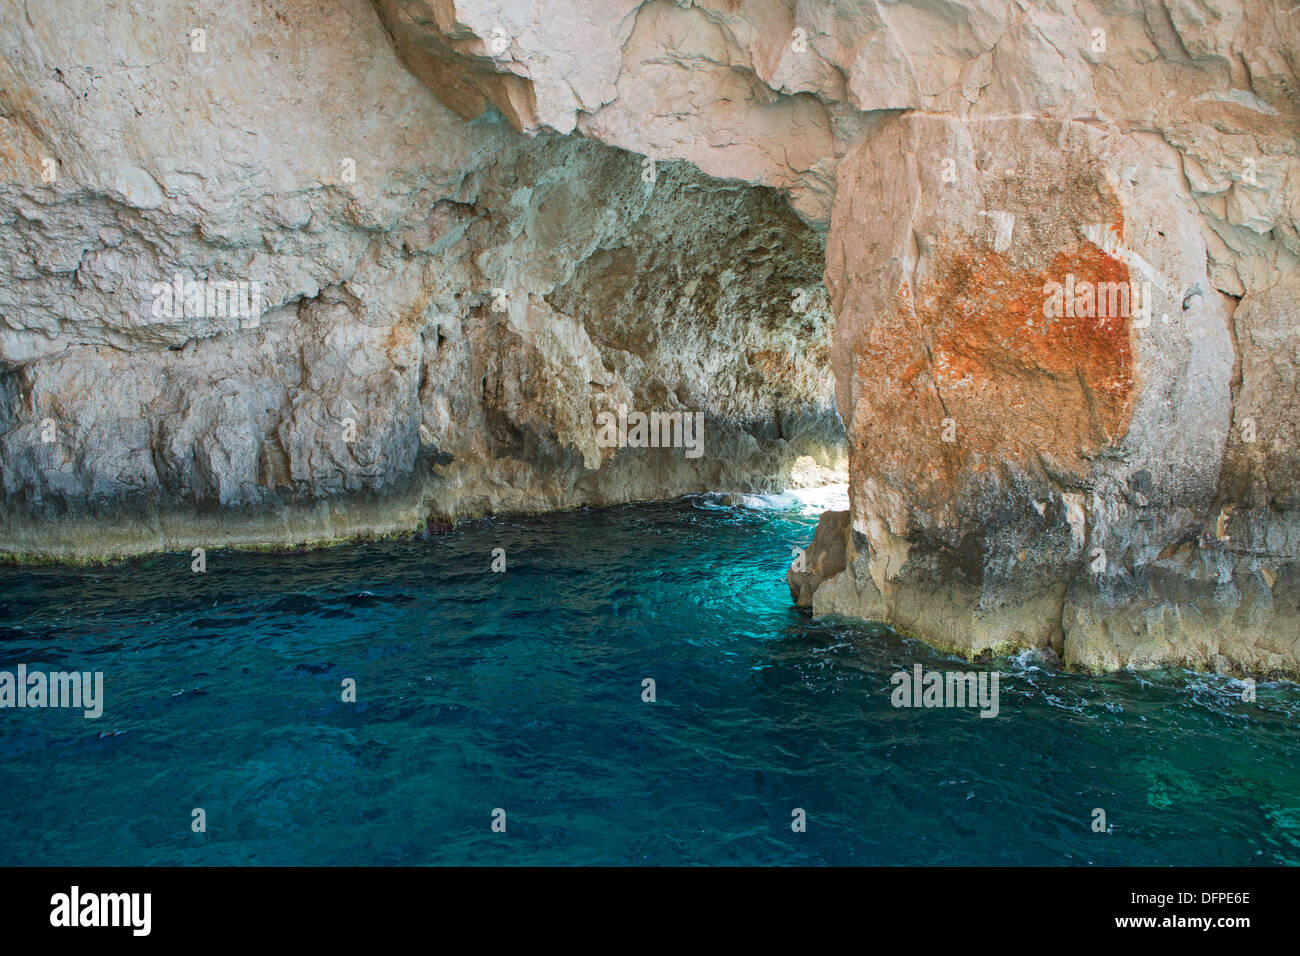 Blue Caves on Zakinthos - the southernmost island of the Ionian archipelago in Greece. Stock Photo